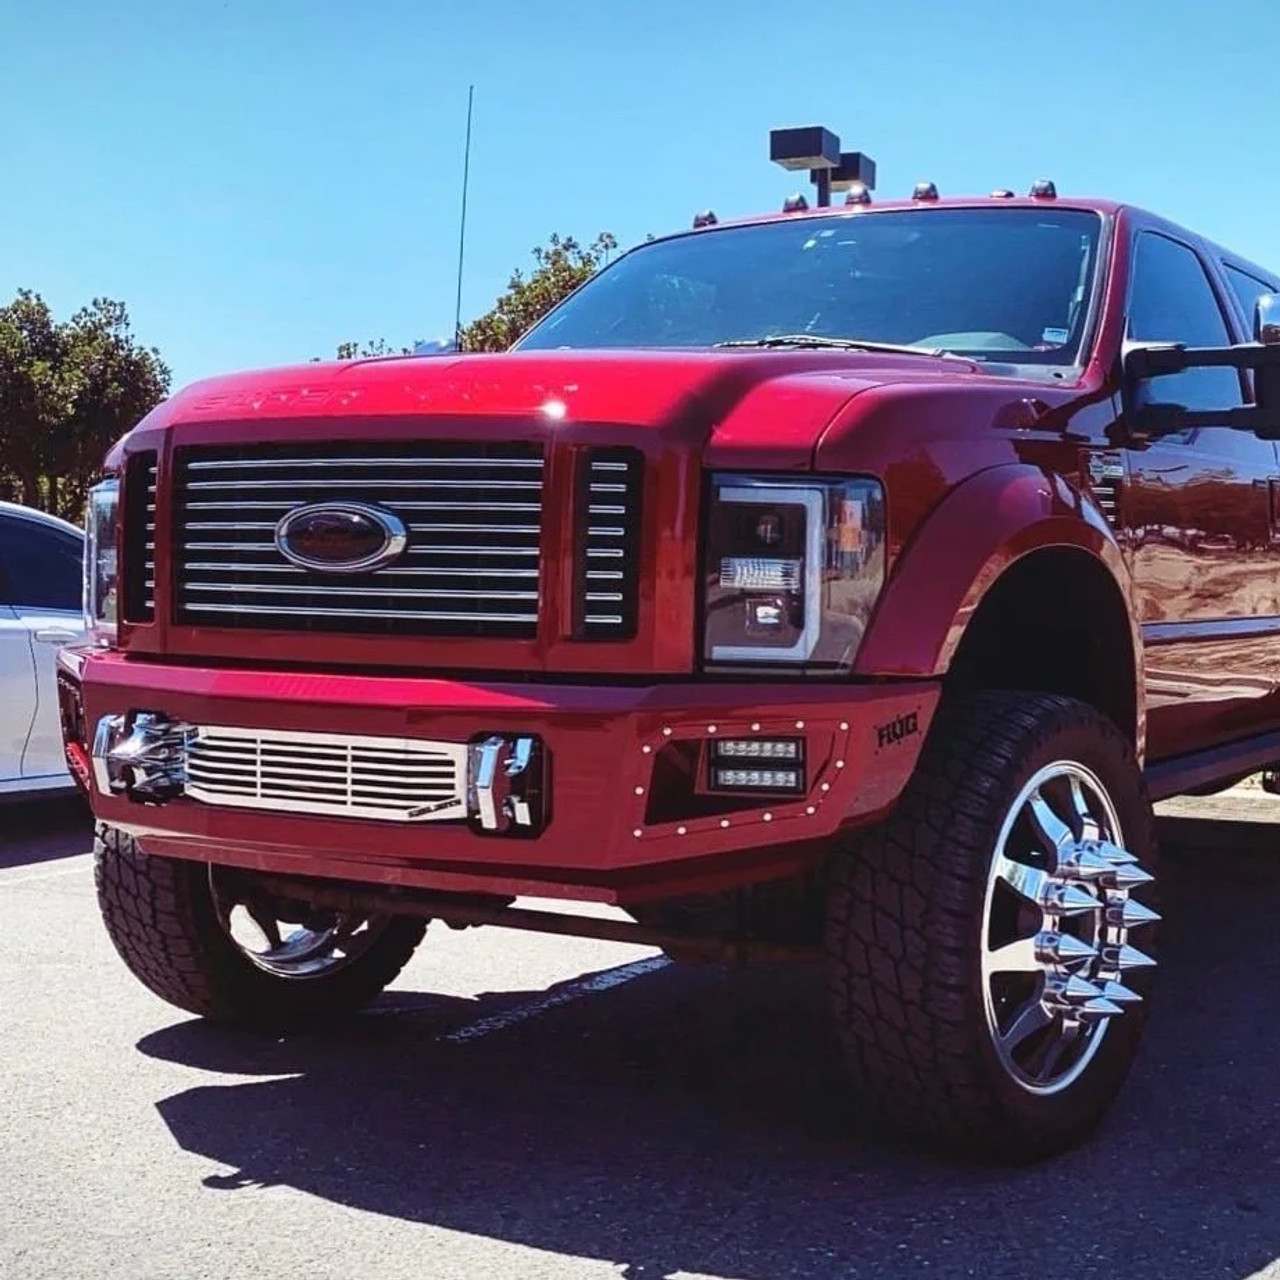 FLOG SD Series Front Bumper - 2008-2010 Ford (F-250/350) 6.4L Powerstroke (FLOGSDFront0810) main in use view